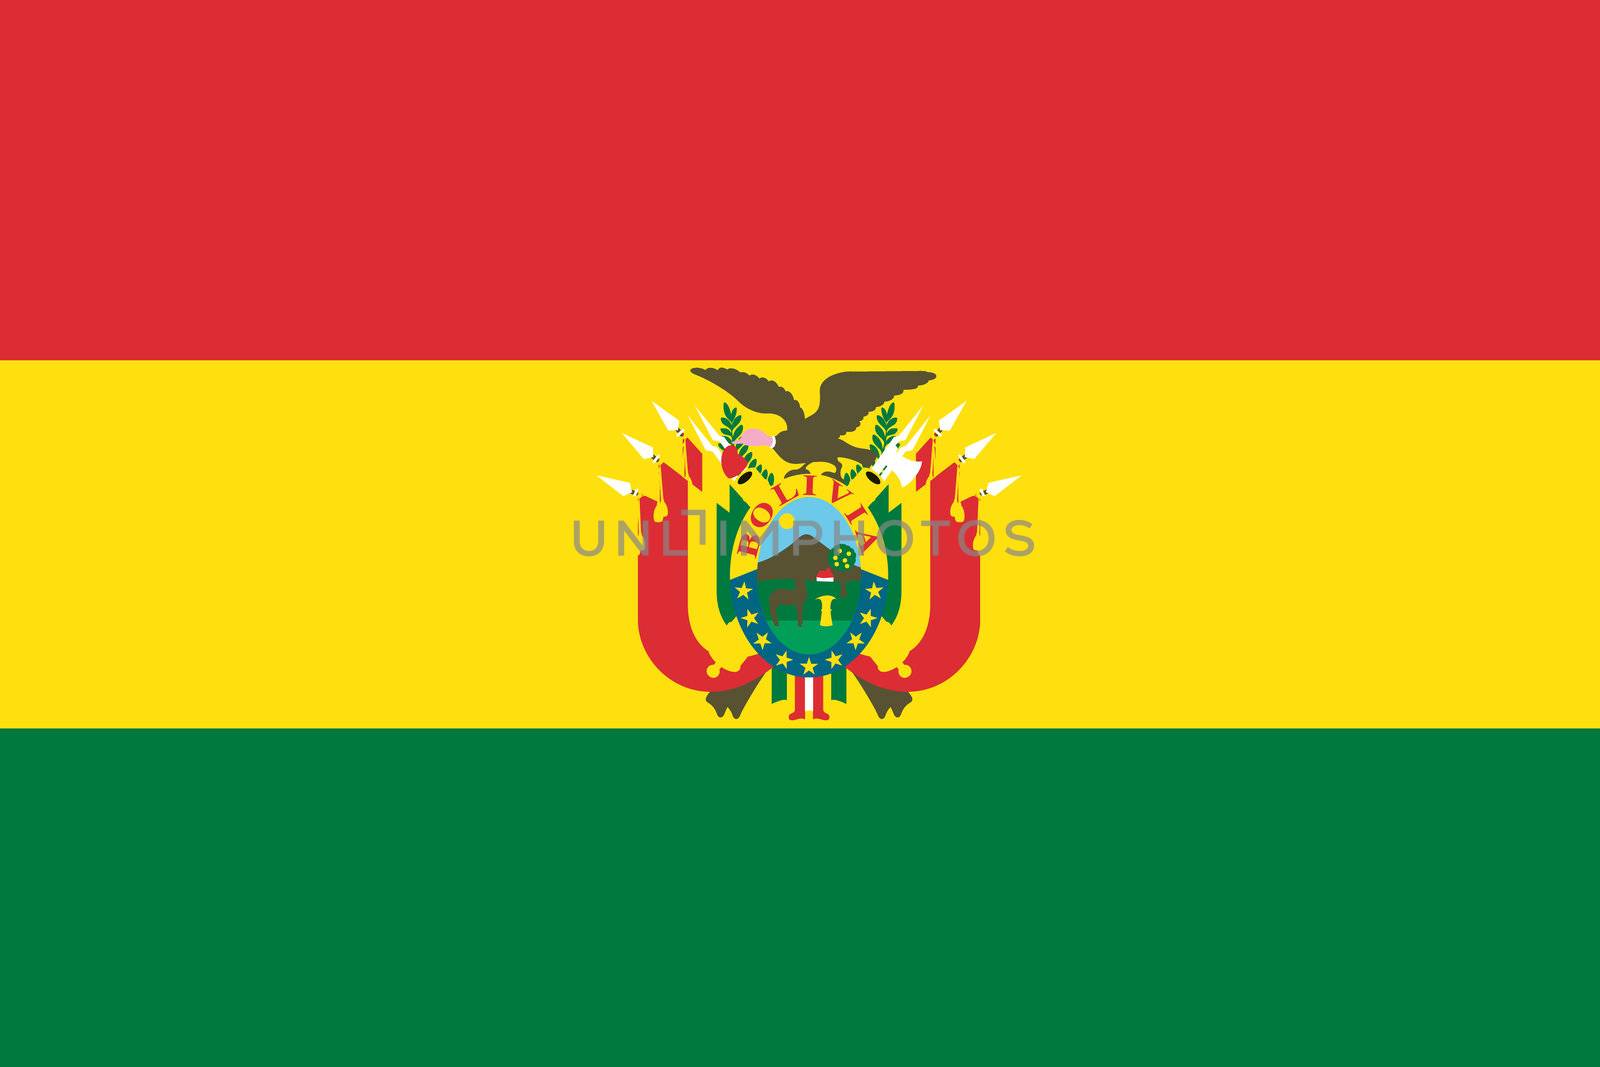 An illustration of the flag of Bolivia